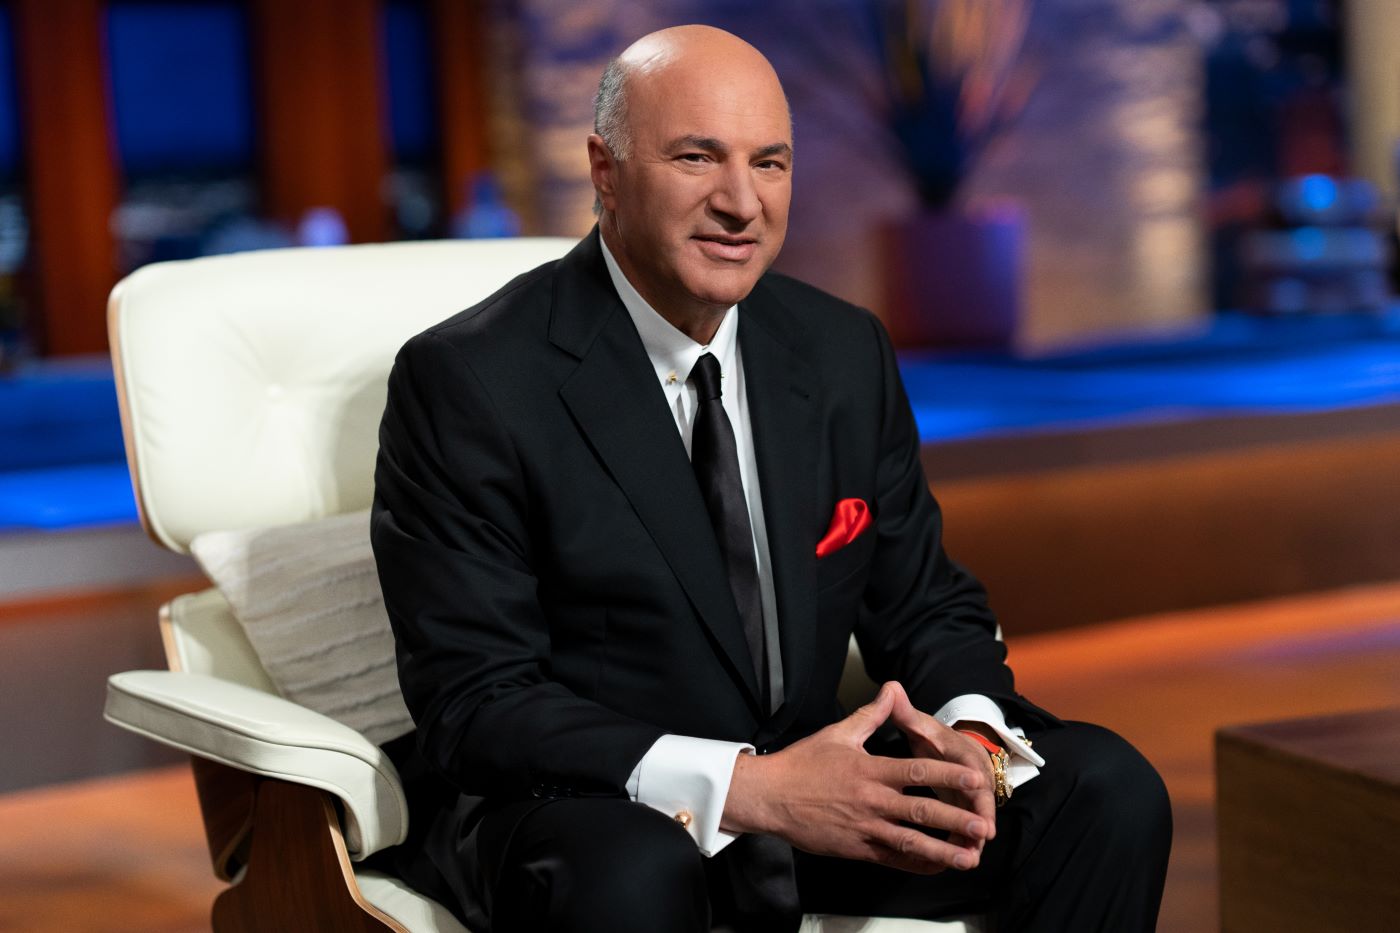 Kevin O'Leary sitting a chair on the set of 'Shark Tank' in a traditional black suit with a white shirt and black tie.